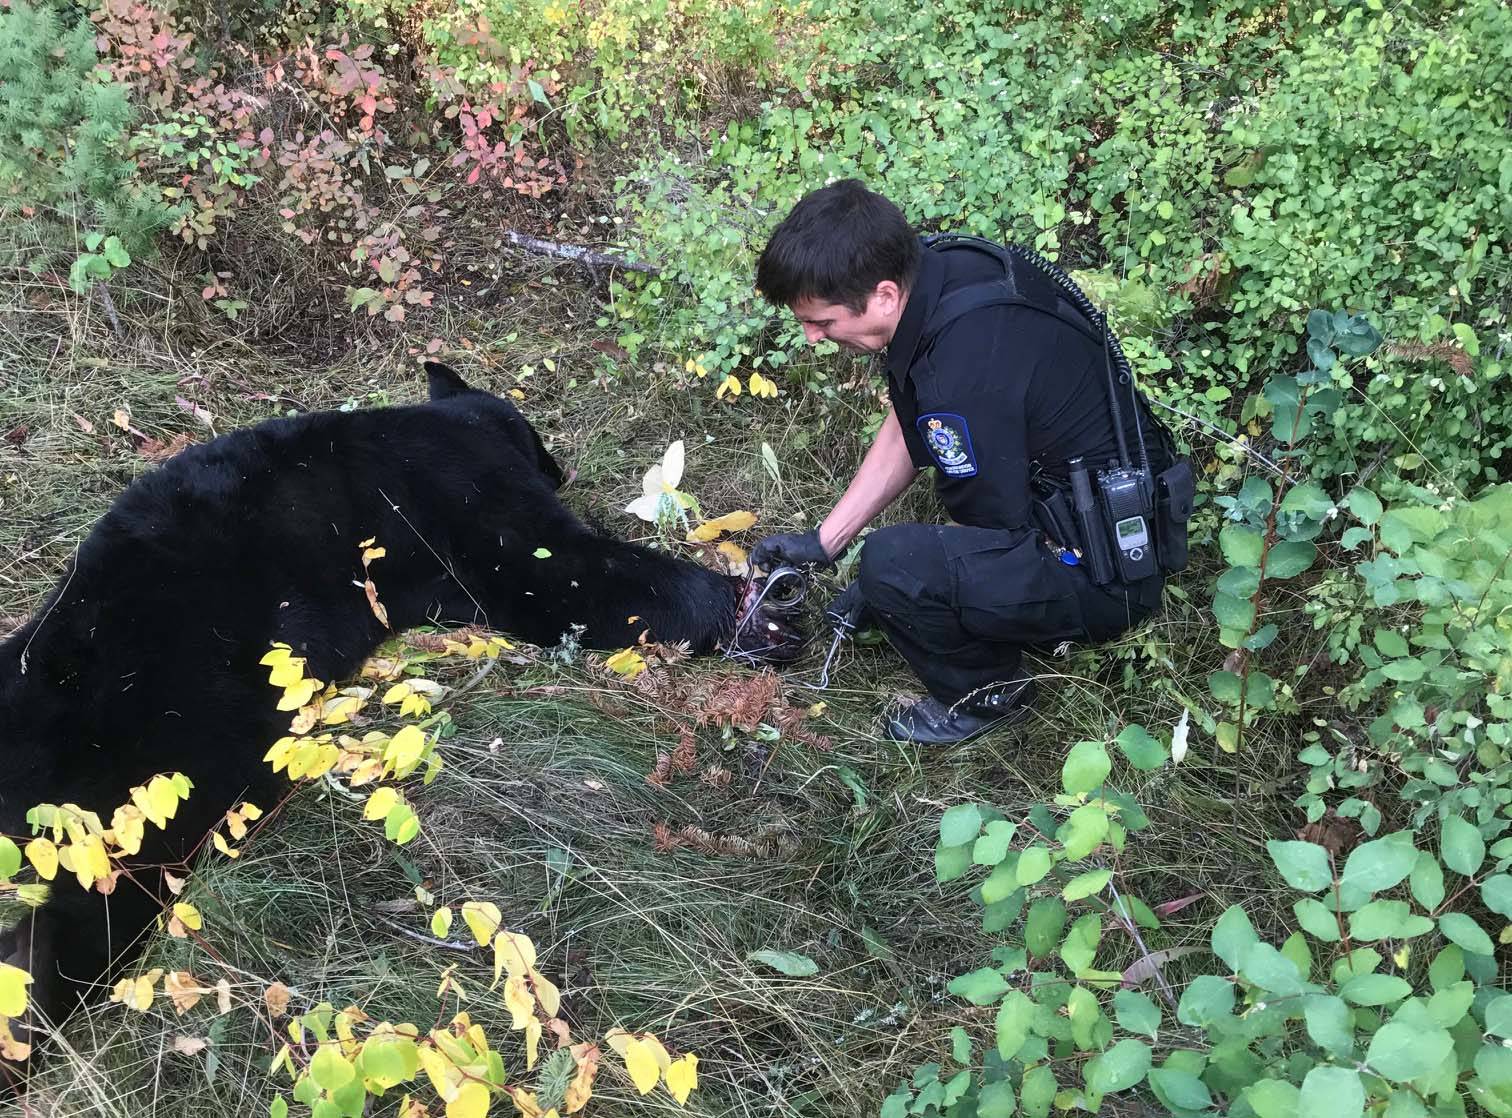 Injured bear released by conservation officer near Golden